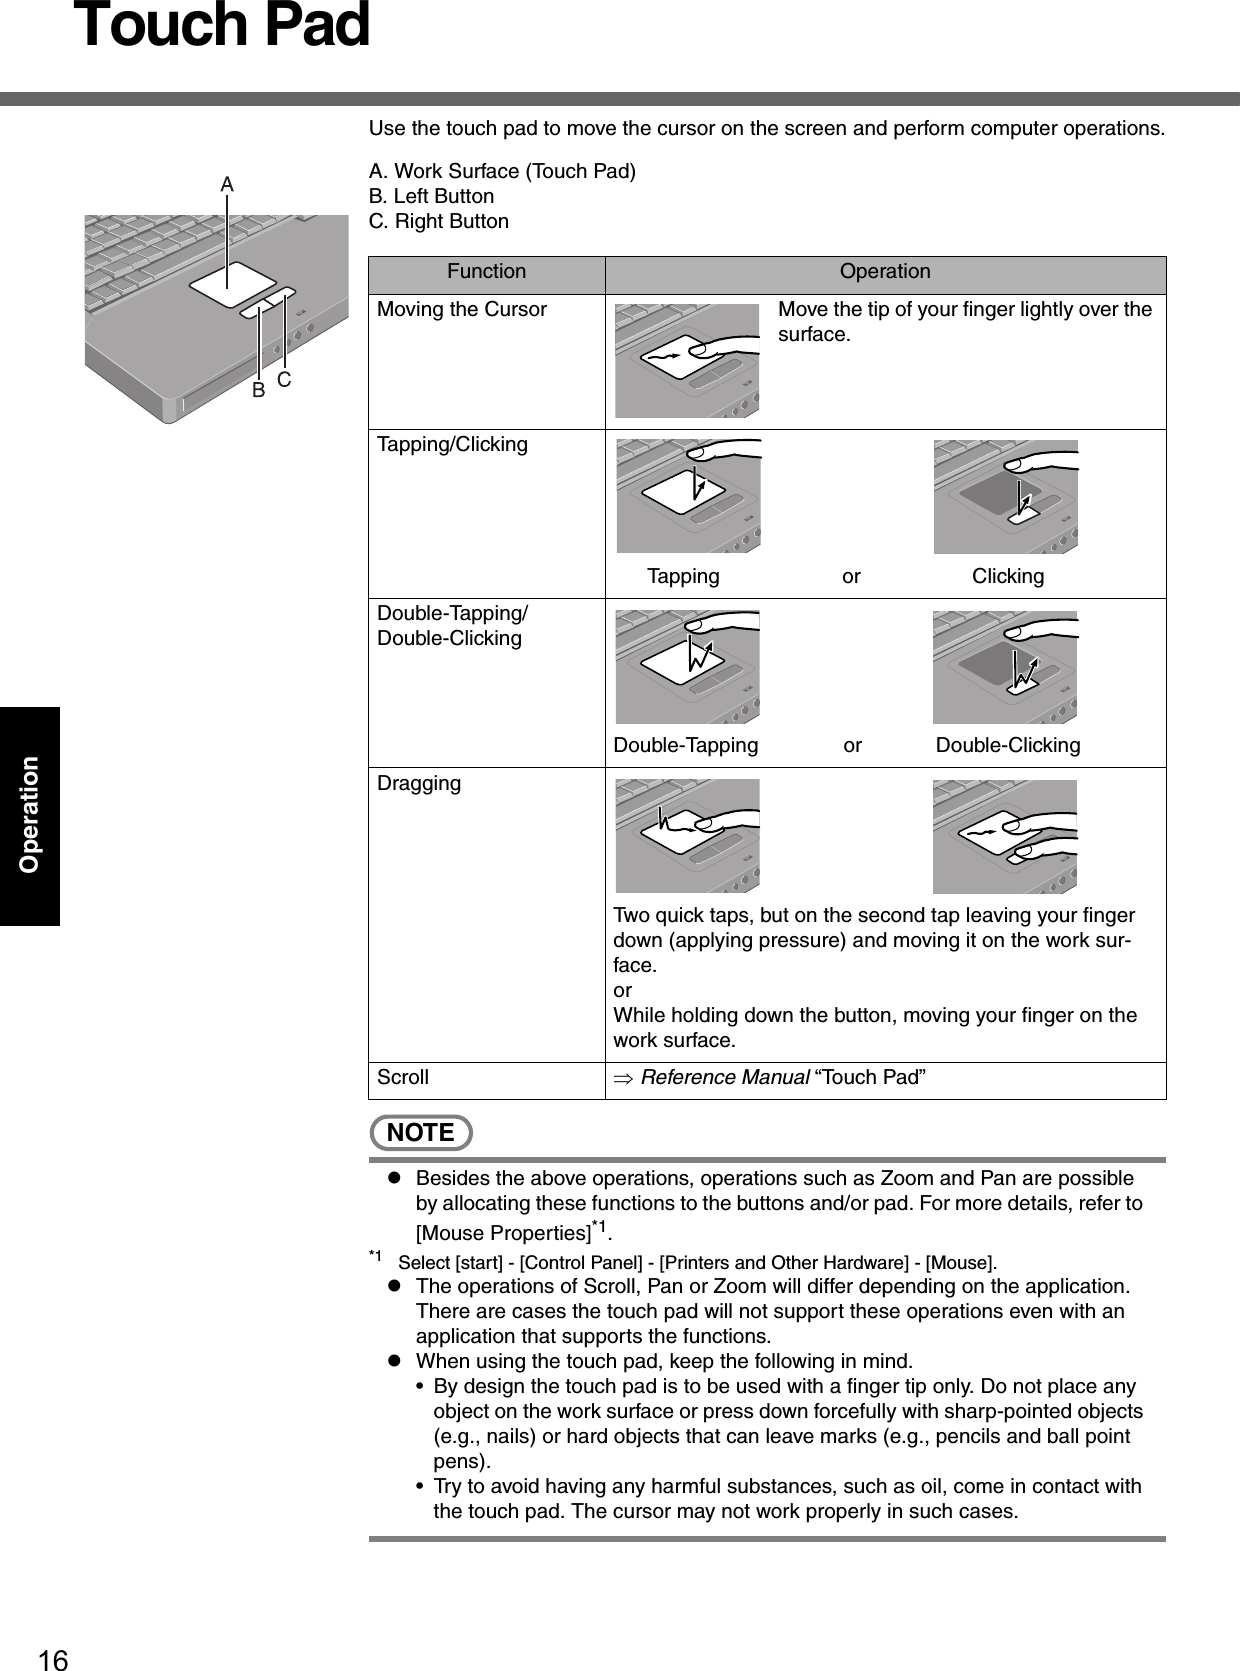 16OperationTouch PadUse the touch pad to move the cursor on the screen and perform computer operations.A. Work Surface (Touch Pad)B. Left ButtonC. Right ButtonNOTEzBesides the above operations, operations such as Zoom and Pan are possible by allocating these functions to the buttons and/or pad. For more details, refer to [Mouse Properties]*1.*1 Select [start] - [Control Panel] - [Printers and Other Hardware] - [Mouse].zThe operations of Scroll, Pan or Zoom will differ depending on the application. There are cases the touch pad will not support these operations even with an application that supports the functions.zWhen using the touch pad, keep the following in mind.• By design the touch pad is to be used with a finger tip only. Do not place any object on the work surface or press down forcefully with sharp-pointed objects (e.g., nails) or hard objects that can leave marks (e.g., pencils and ball point pens).• Try to avoid having any harmful substances, such as oil, come in contact with the touch pad. The cursor may not work properly in such cases.Function OperationMoving the Cursor Move the tip of your finger lightly over the surface.Tapping/ClickingTapping or ClickingDouble-Tapping/Double-ClickingDouble-Tapping or Double-ClickingDraggingTwo quick taps, but on the second tap leaving your finger down (applying pressure) and moving it on the work sur-face.orWhile holding down the button, moving your finger on the work surface.Scroll ⇒ Reference Manual “Touch Pad”